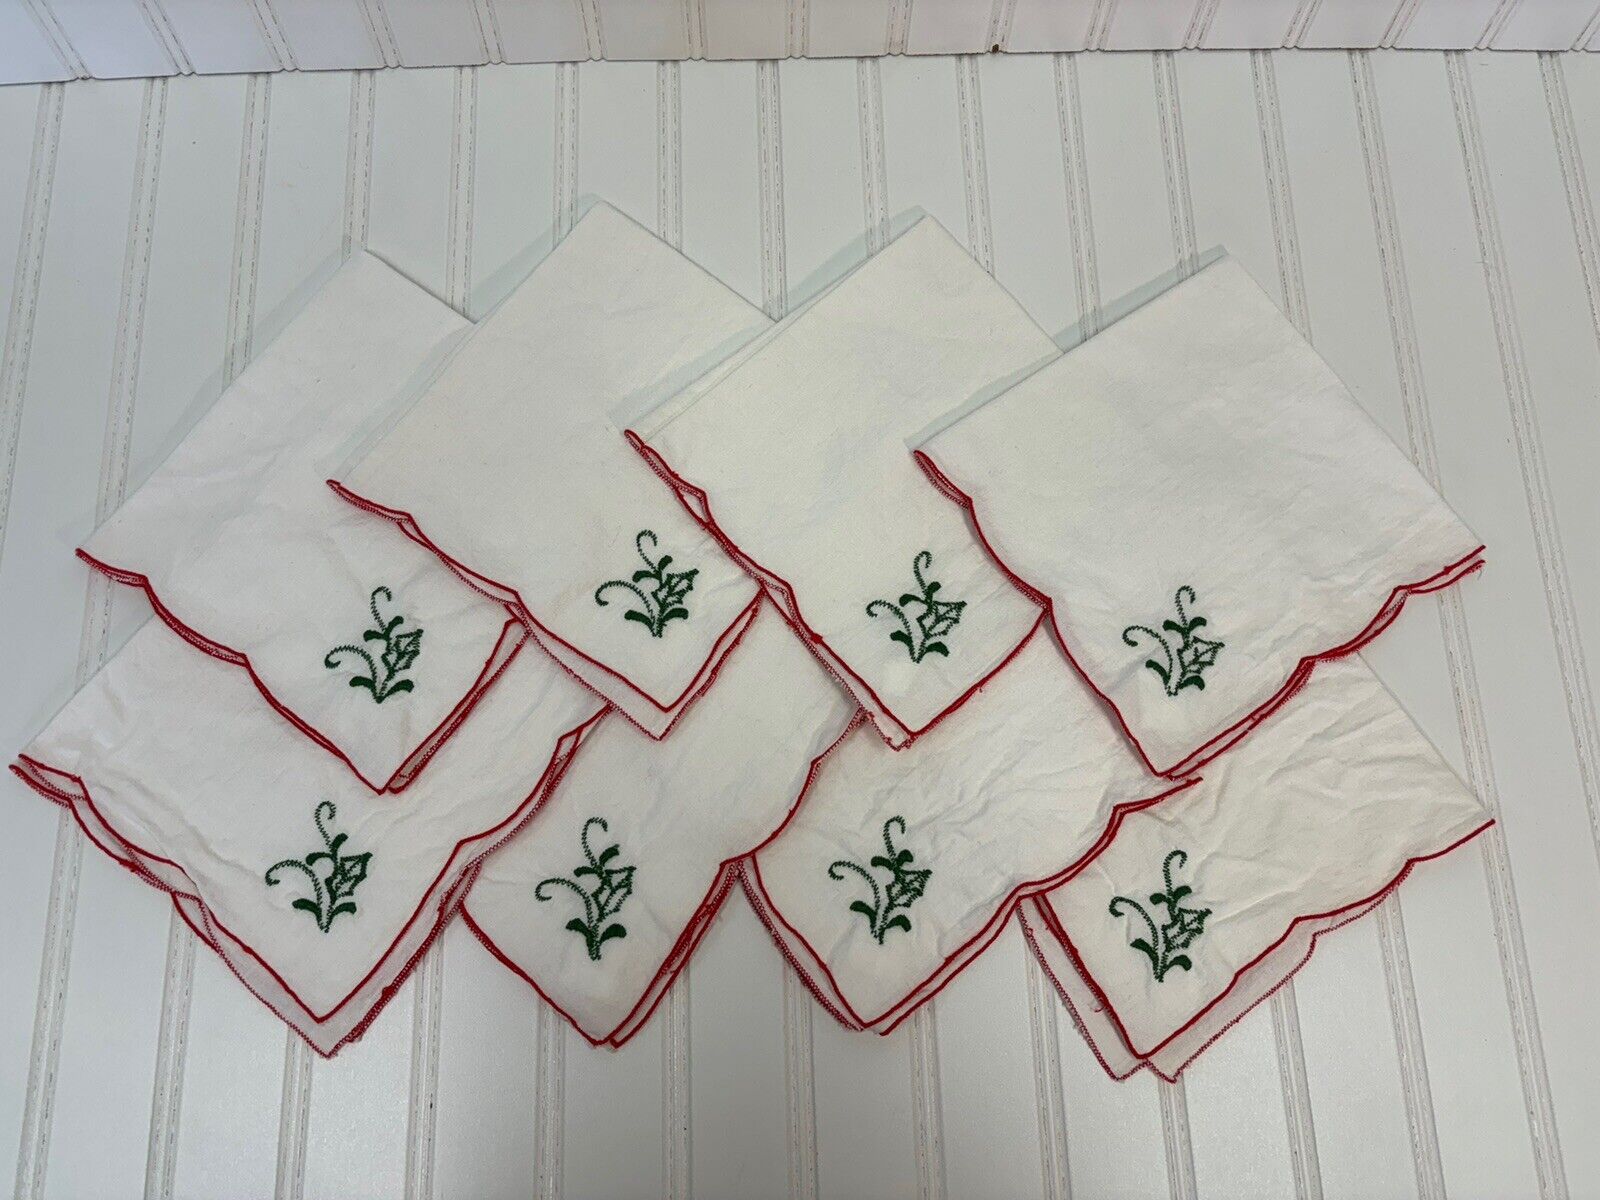 Lot of 8 Vintage Fabric Christmas Napkins White With Green Holly Embroidered